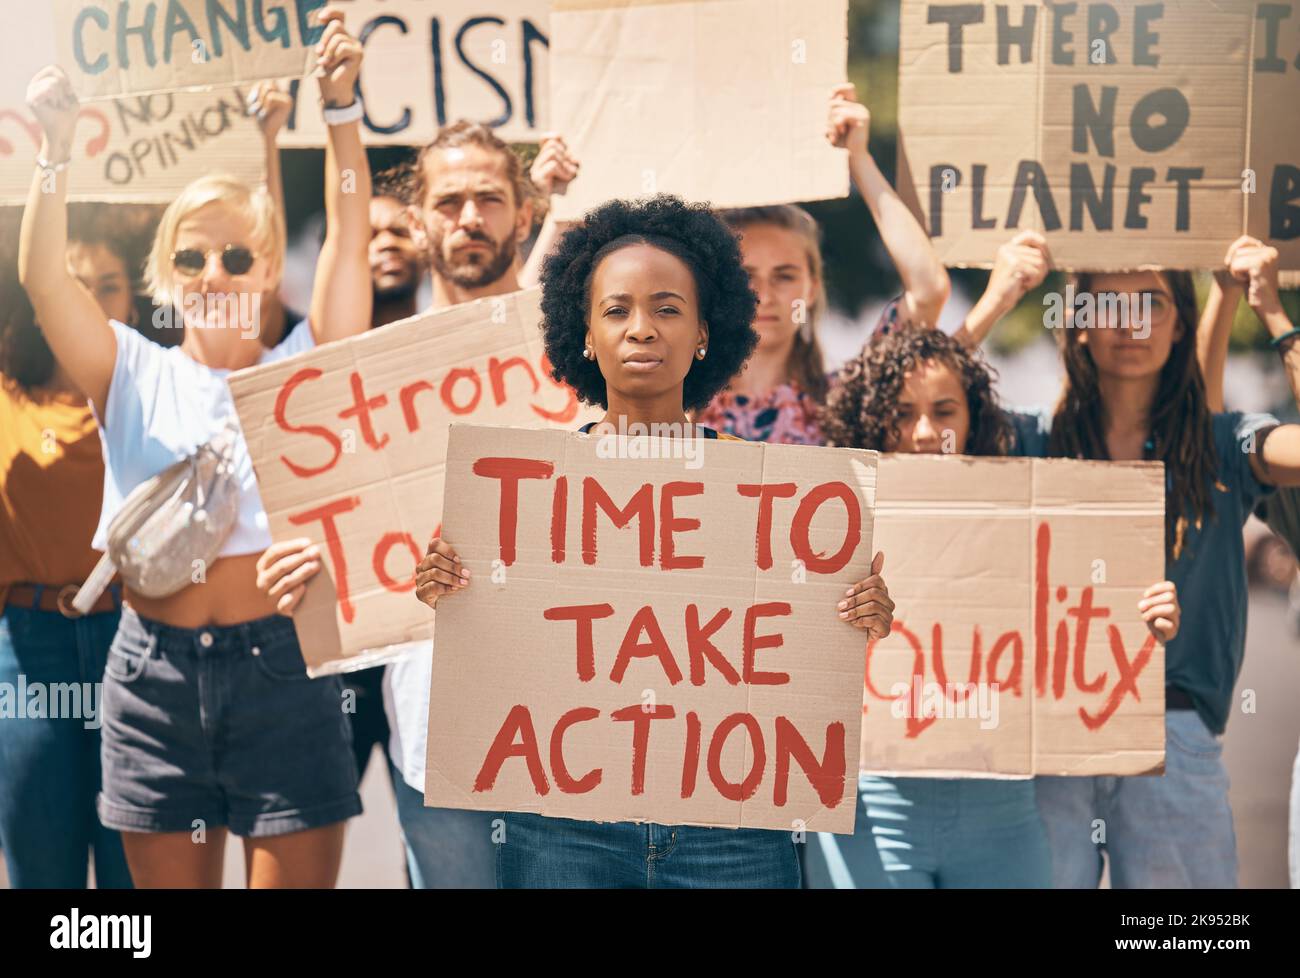 Group, protest and portrait in street, poster or climate change with march, walking or together for change. People, diversity or action in activism Stock Photo